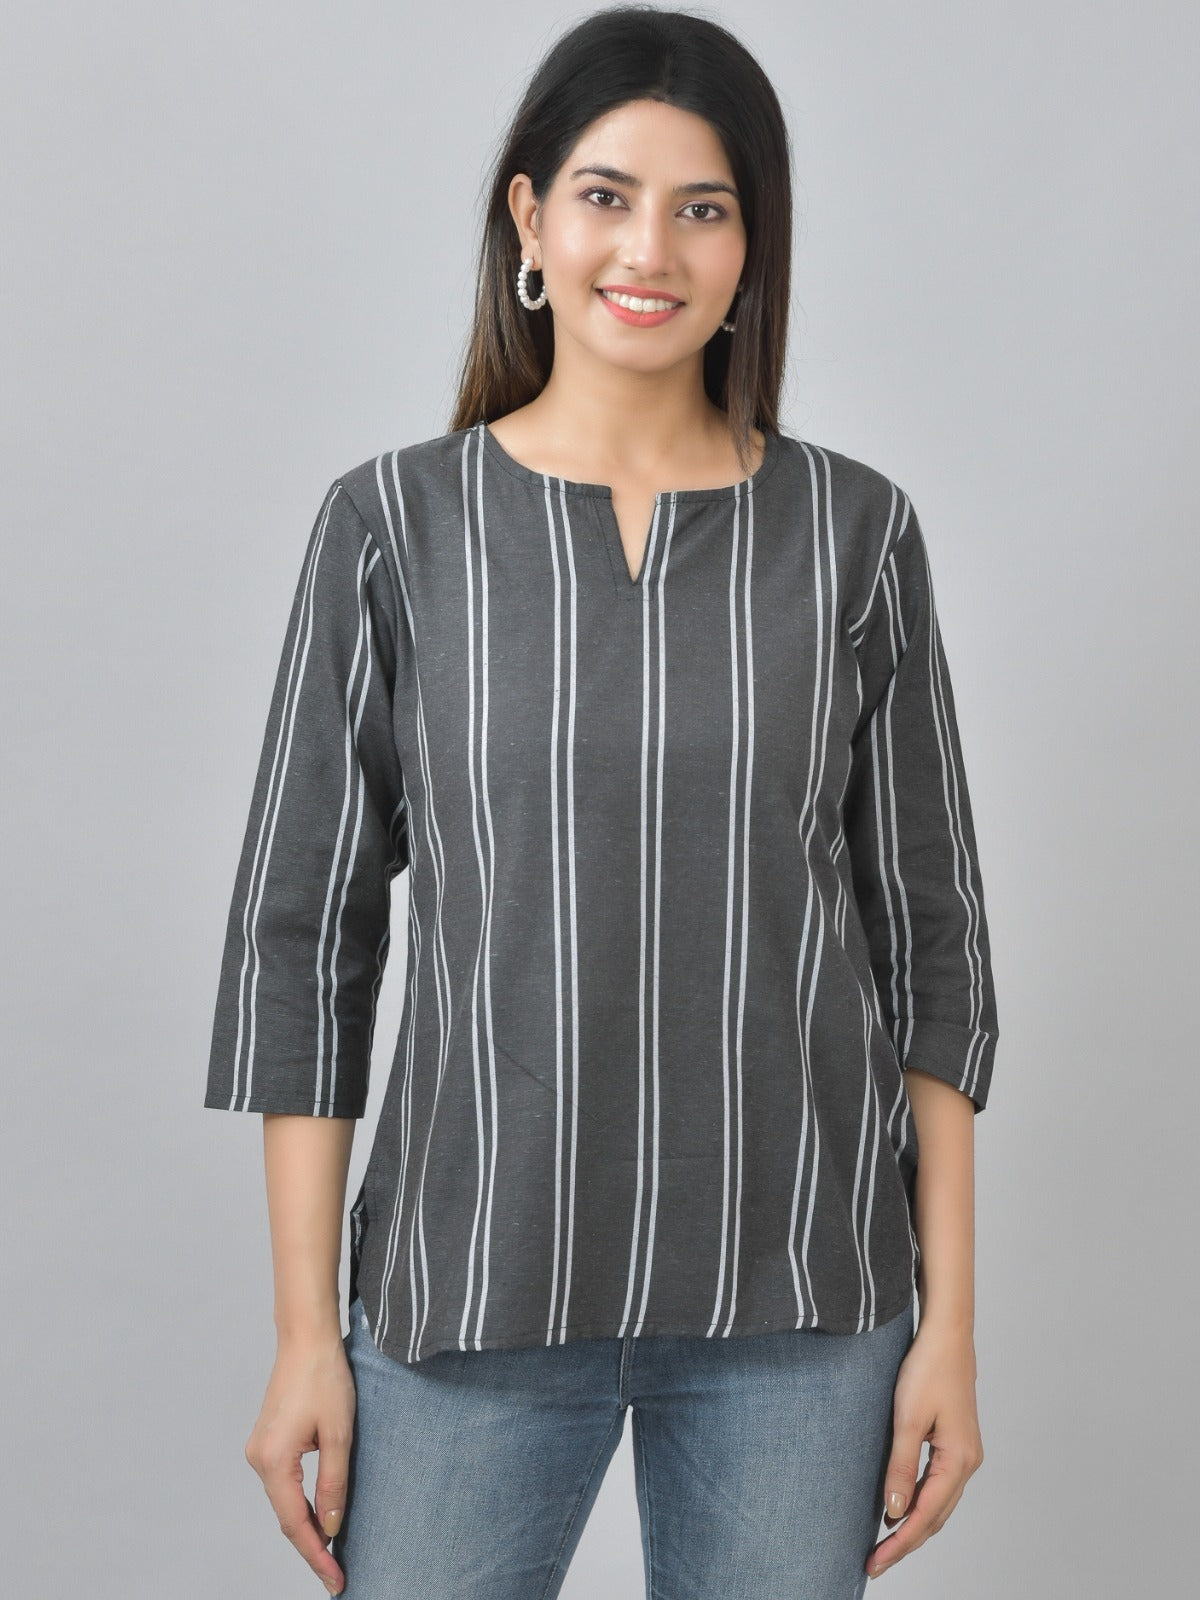 Pack Of 2 Black And Maroon Striped Cotton Womens Top Combo